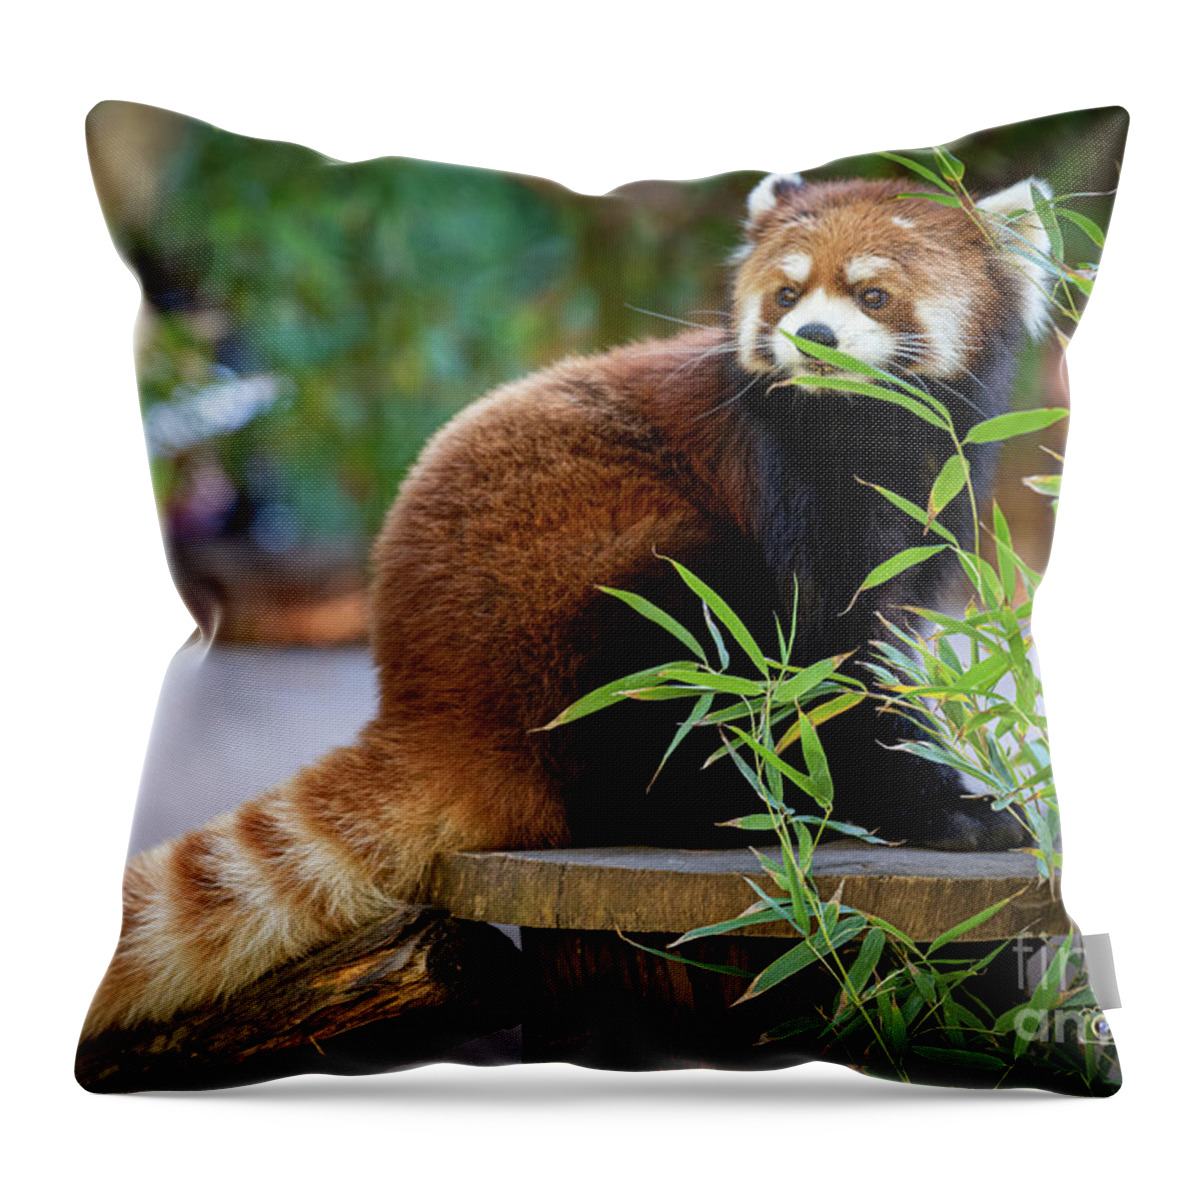 David Levin Photography Throw Pillow featuring the photograph You Can't See Me by David Levin